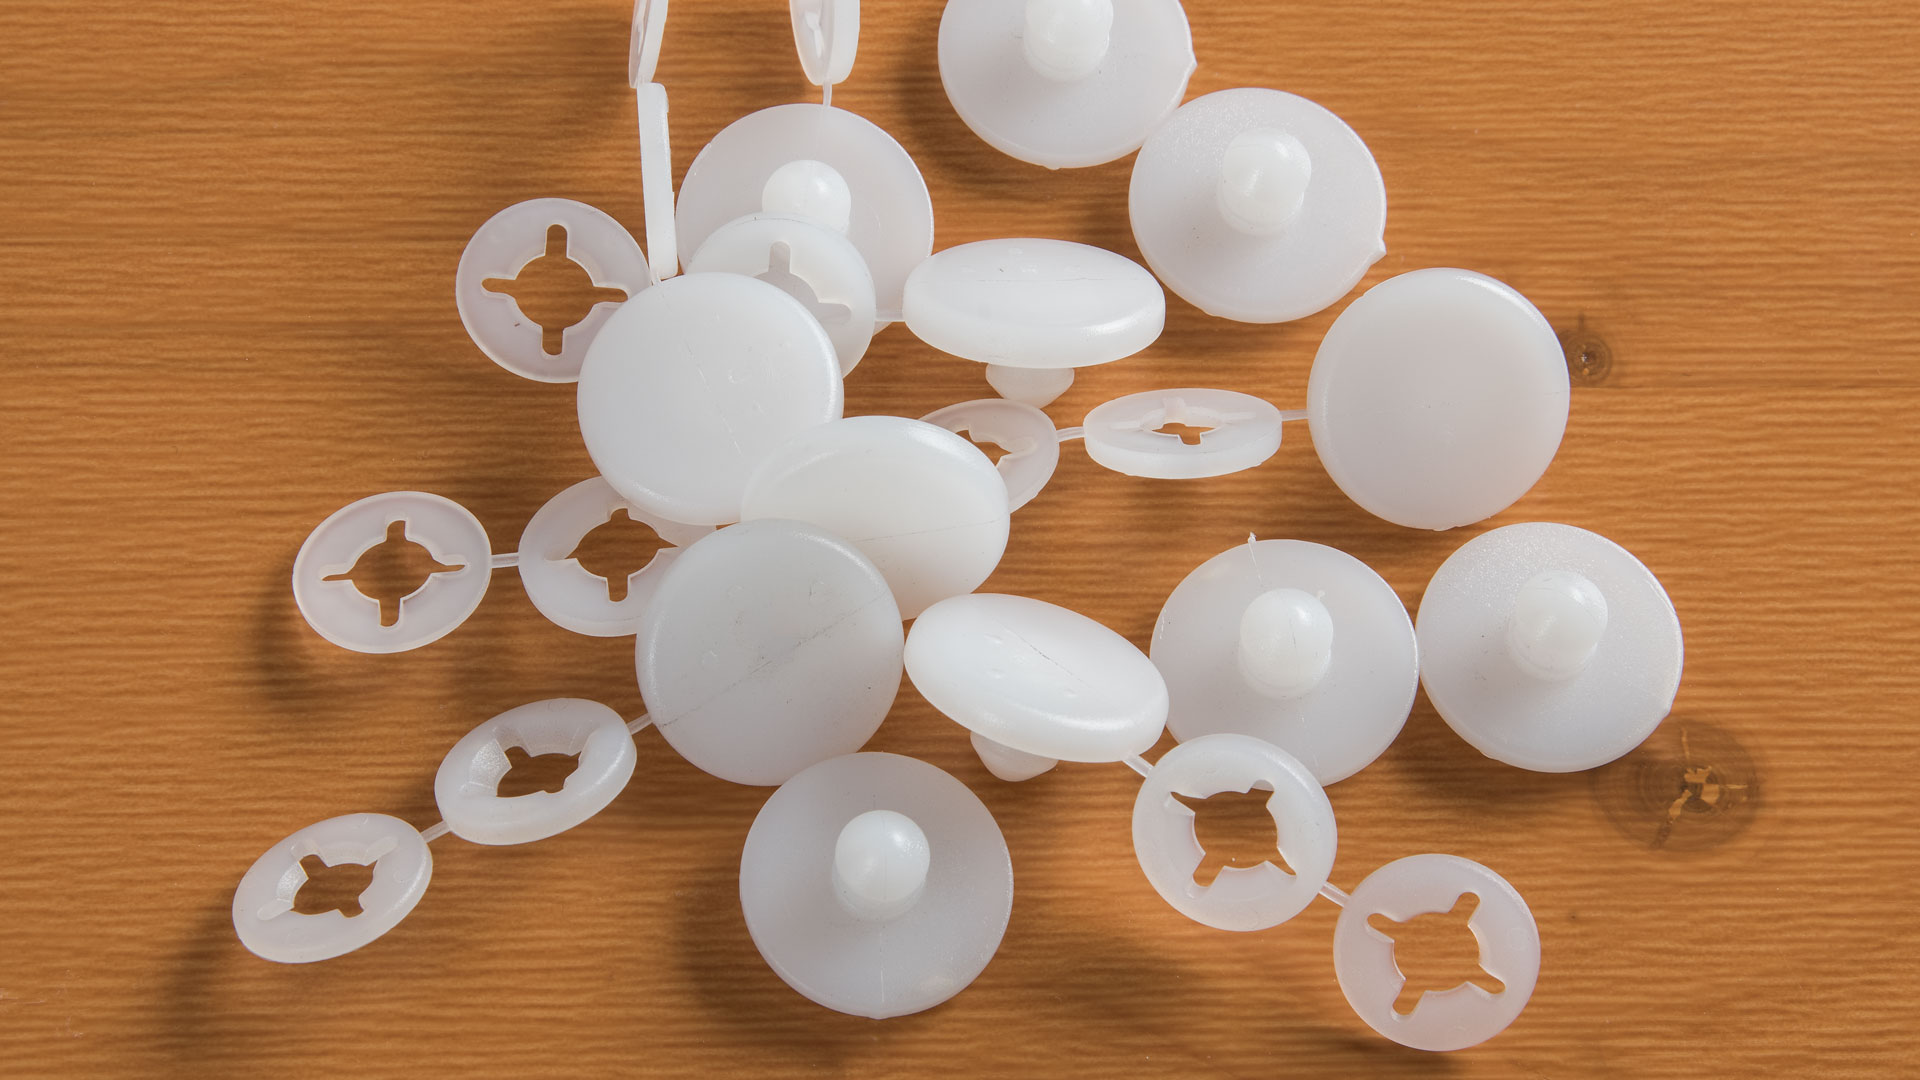 Some white plastic gliders lie on a table